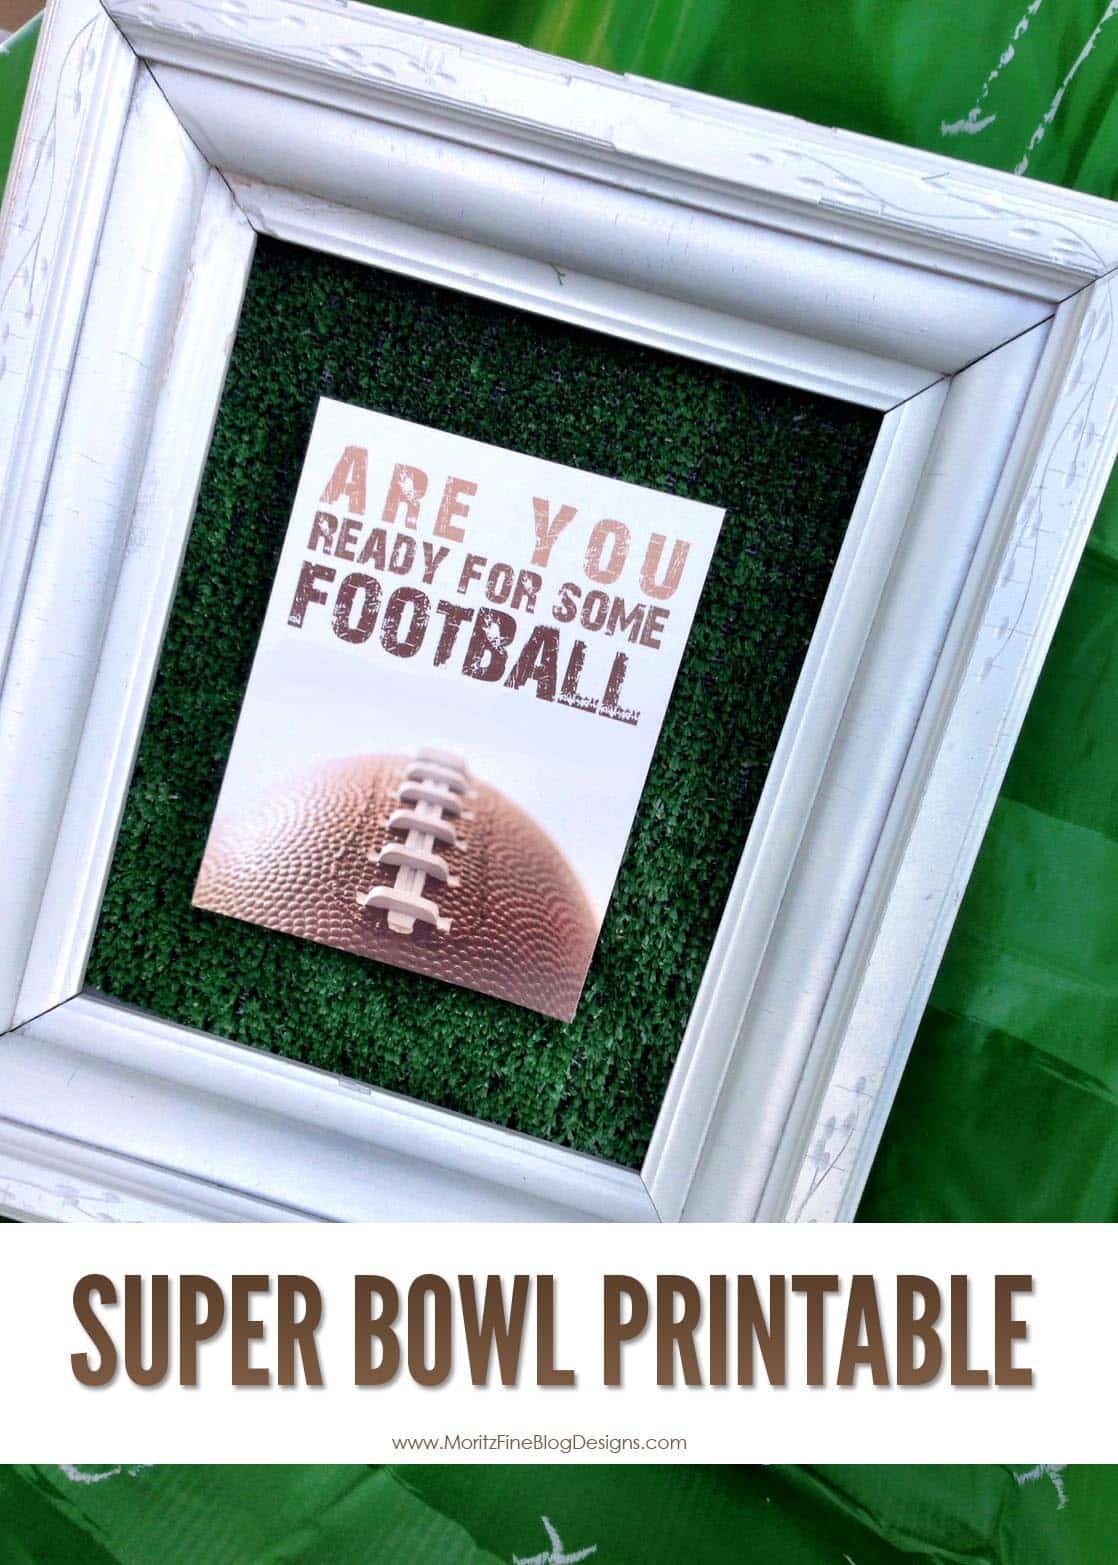 Super Bowl Printable and Invitation. Great for your Super Bowl Party, download and print! Customizable Football Invitation for any football party.